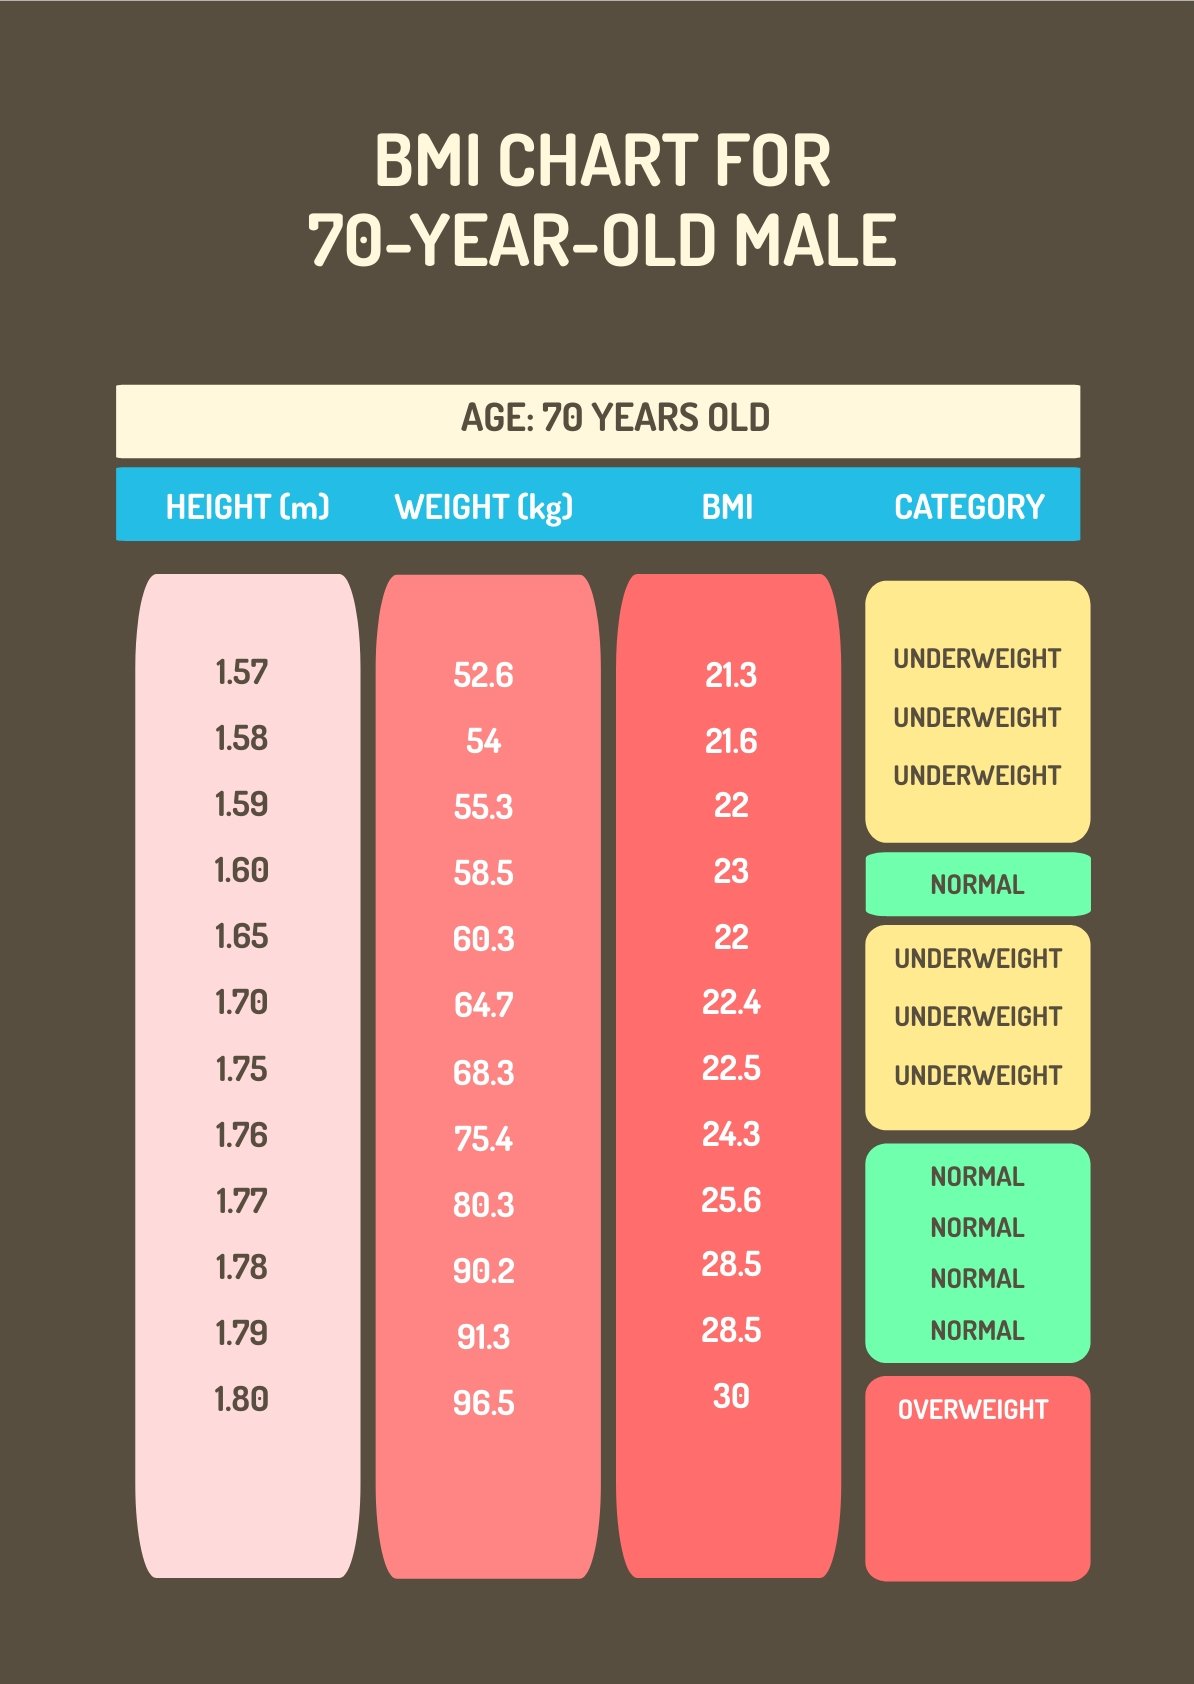 BMI Chart For 70 Year Old Male in PDF, Illustrator